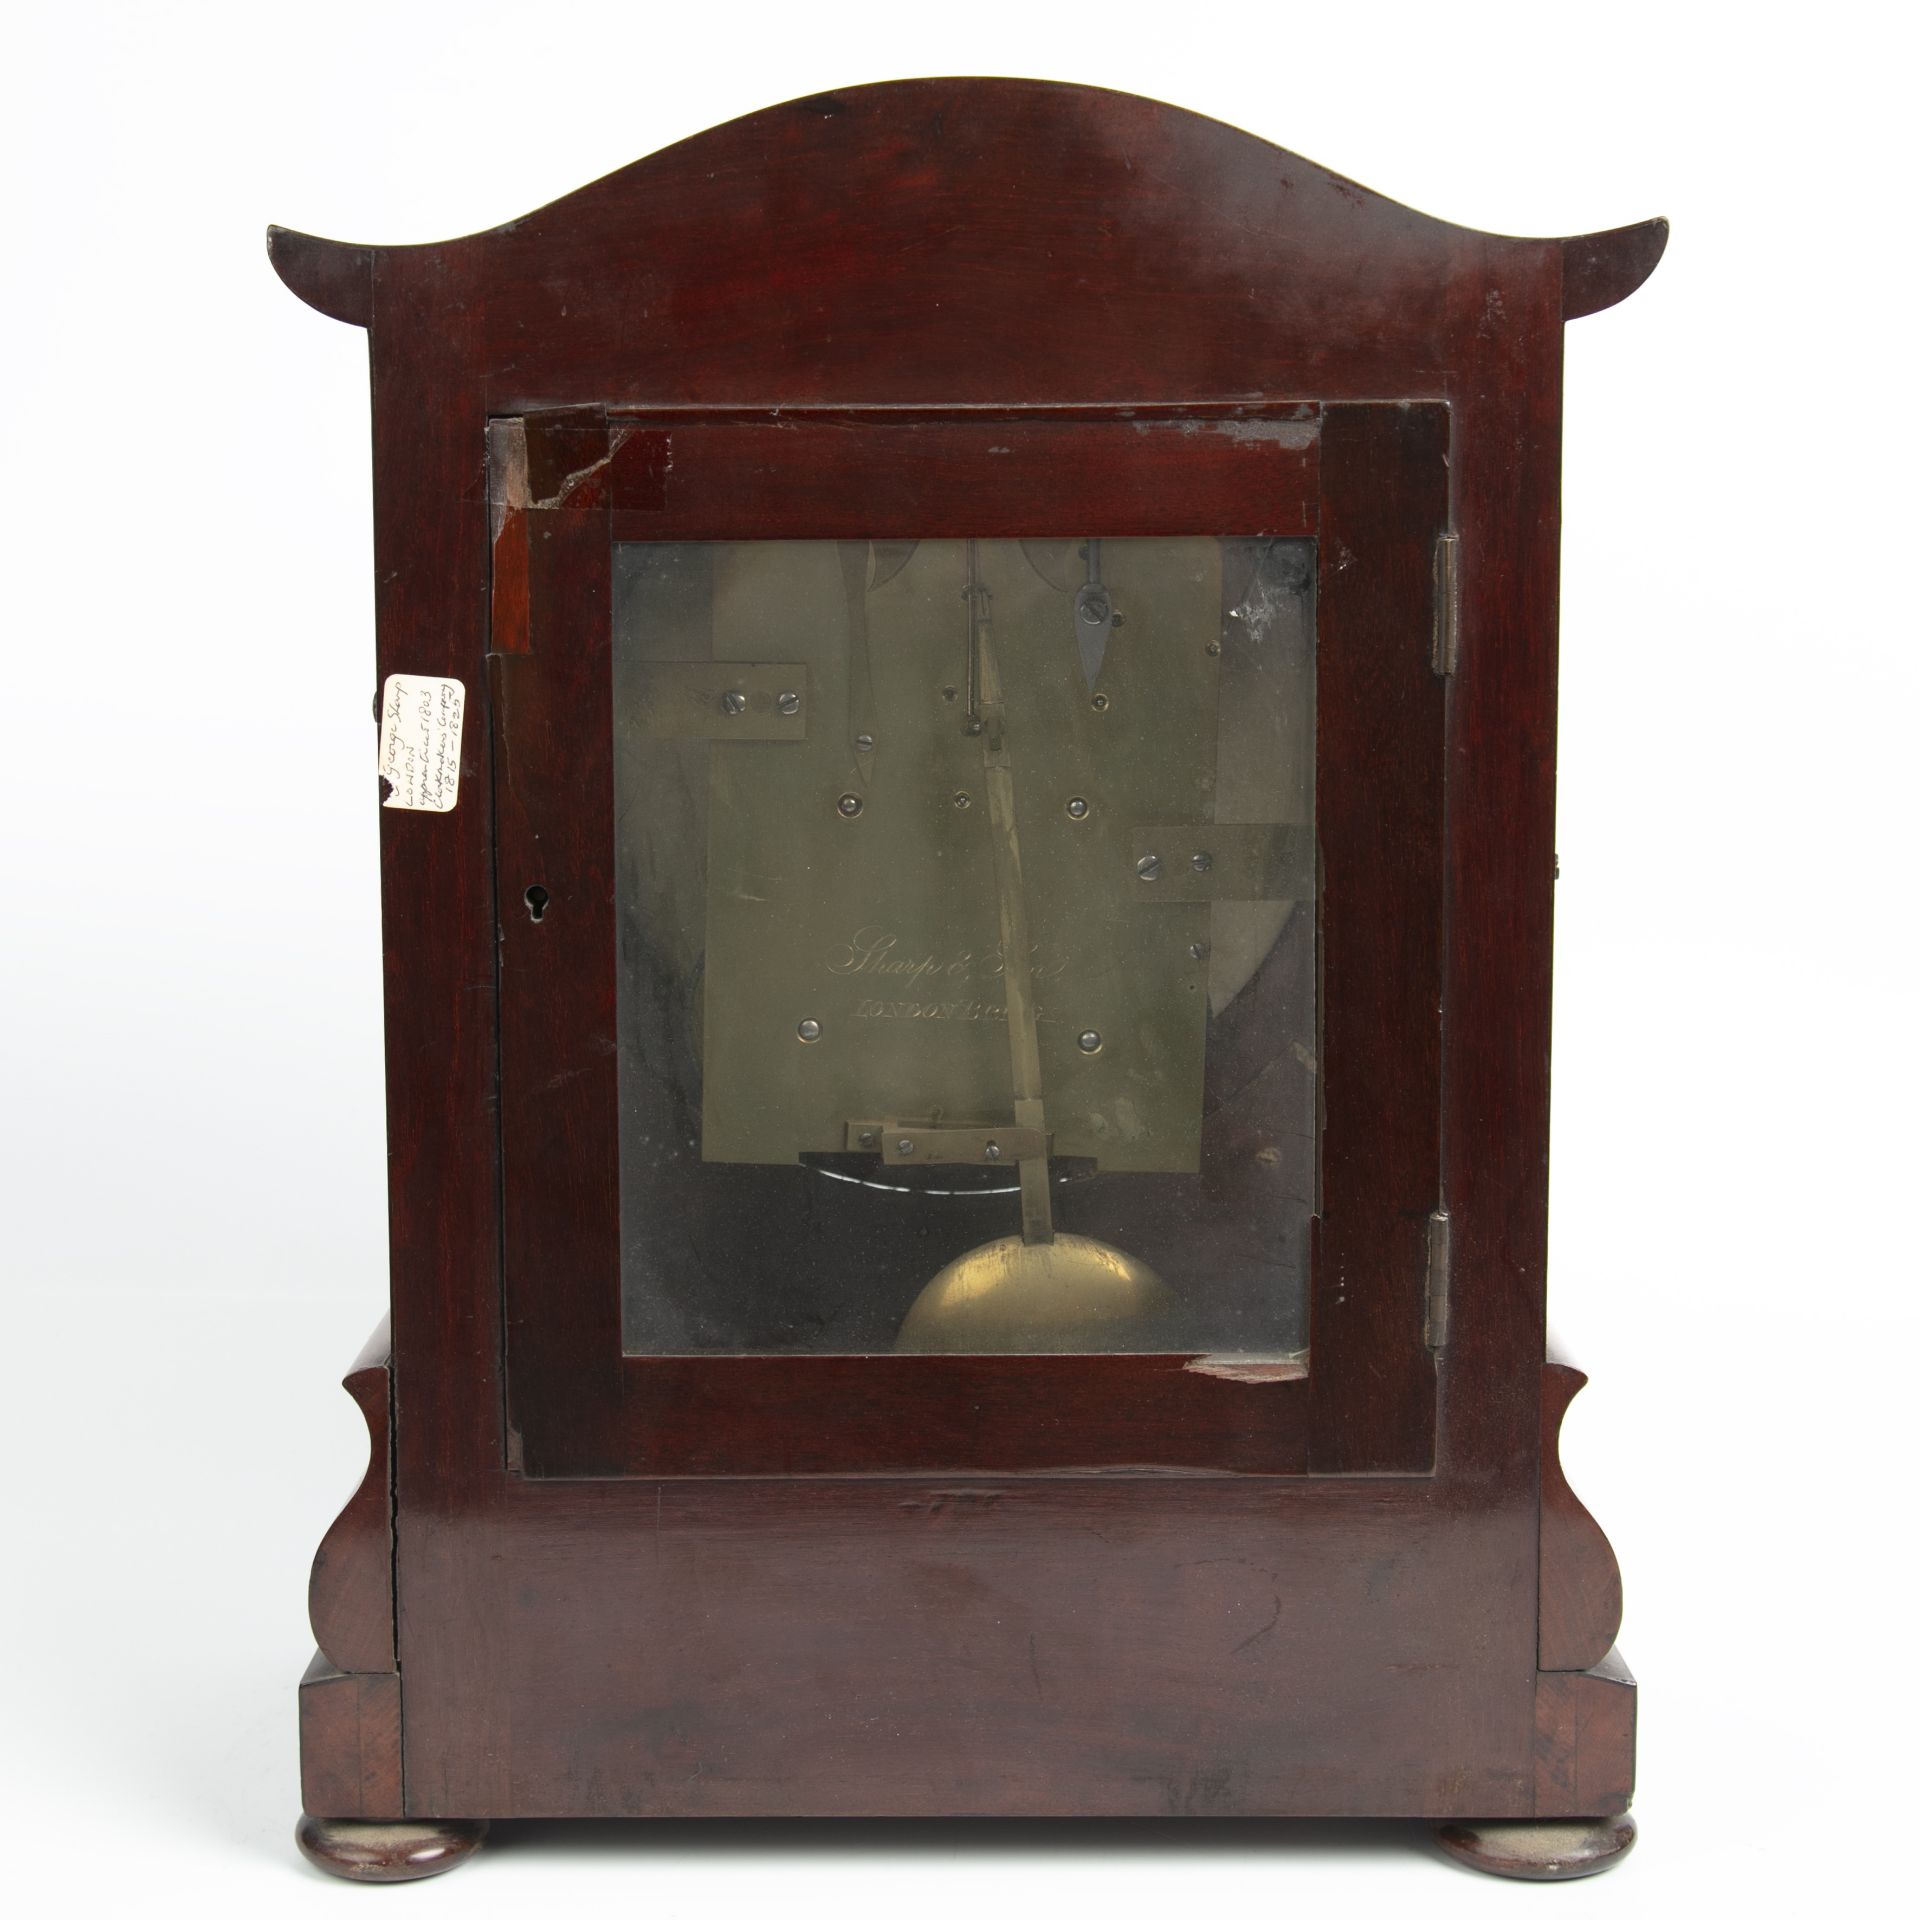 An early 19th century bracket clock by George Sharp having a silvered dial with Roman numerals and a - Image 4 of 5